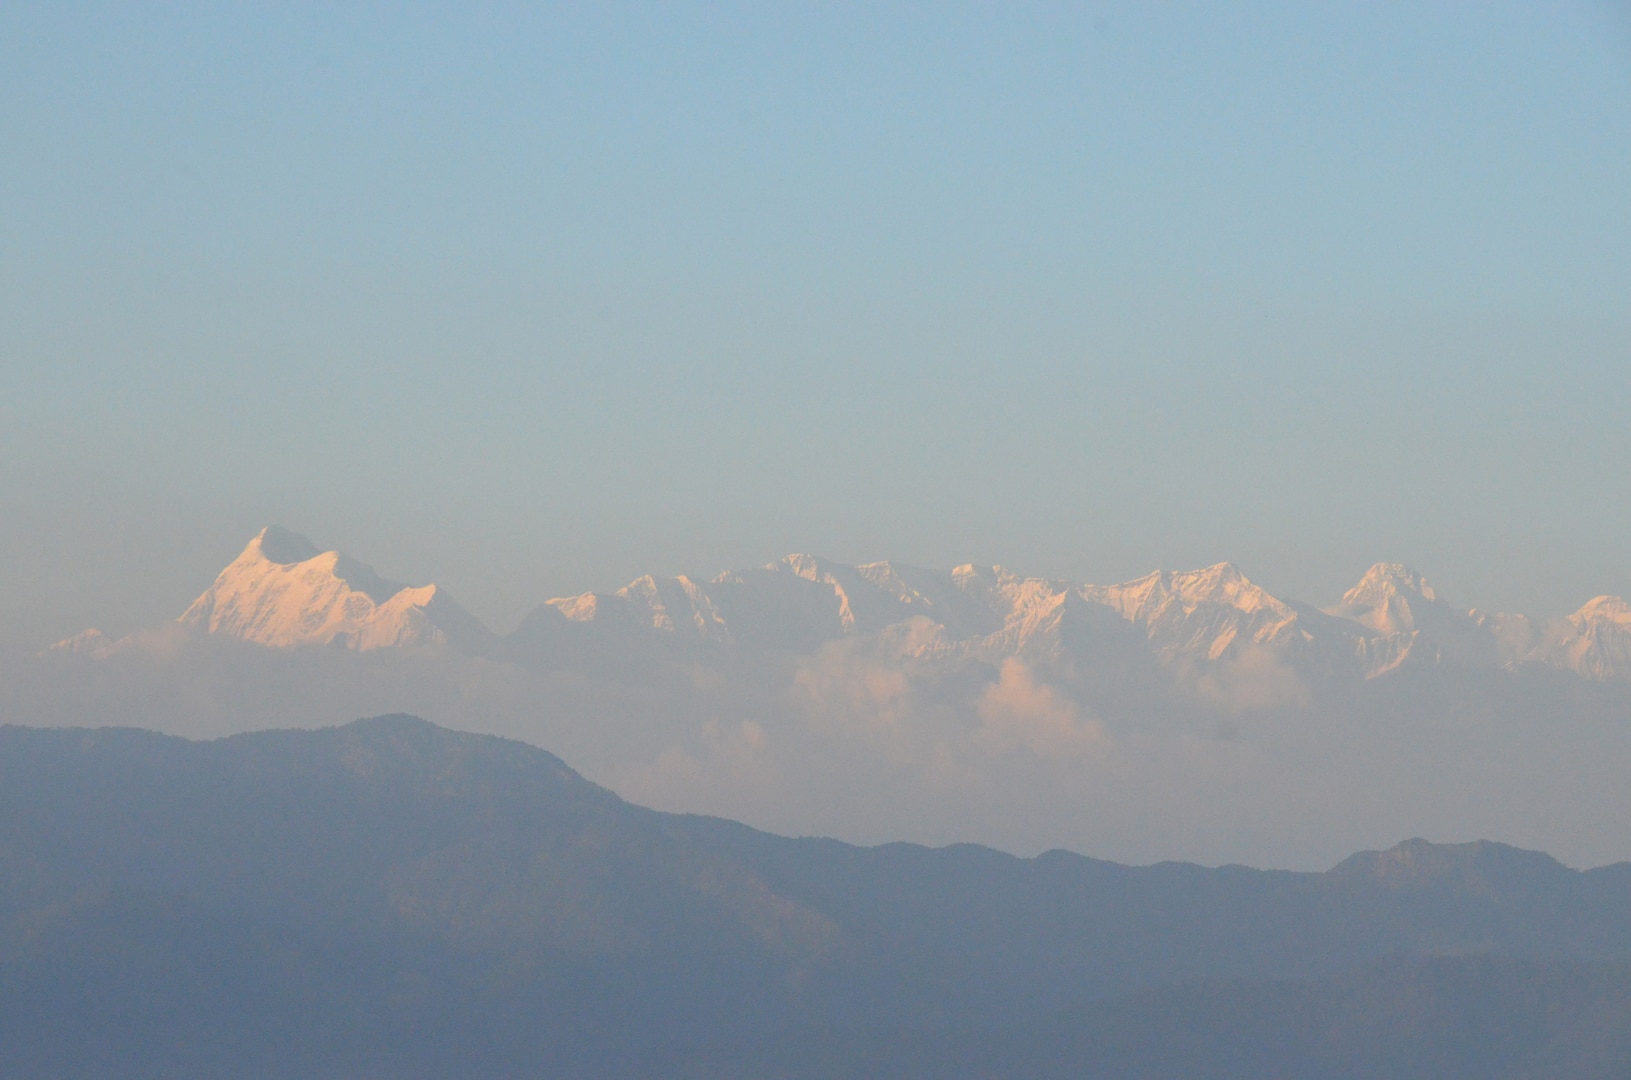 Yudh Abhyas 2014 took place above 6,000 feet at Ranikhet Cantonment in the Indian state of Uttarakhand. The Himalayas provided a backdrop for the training.